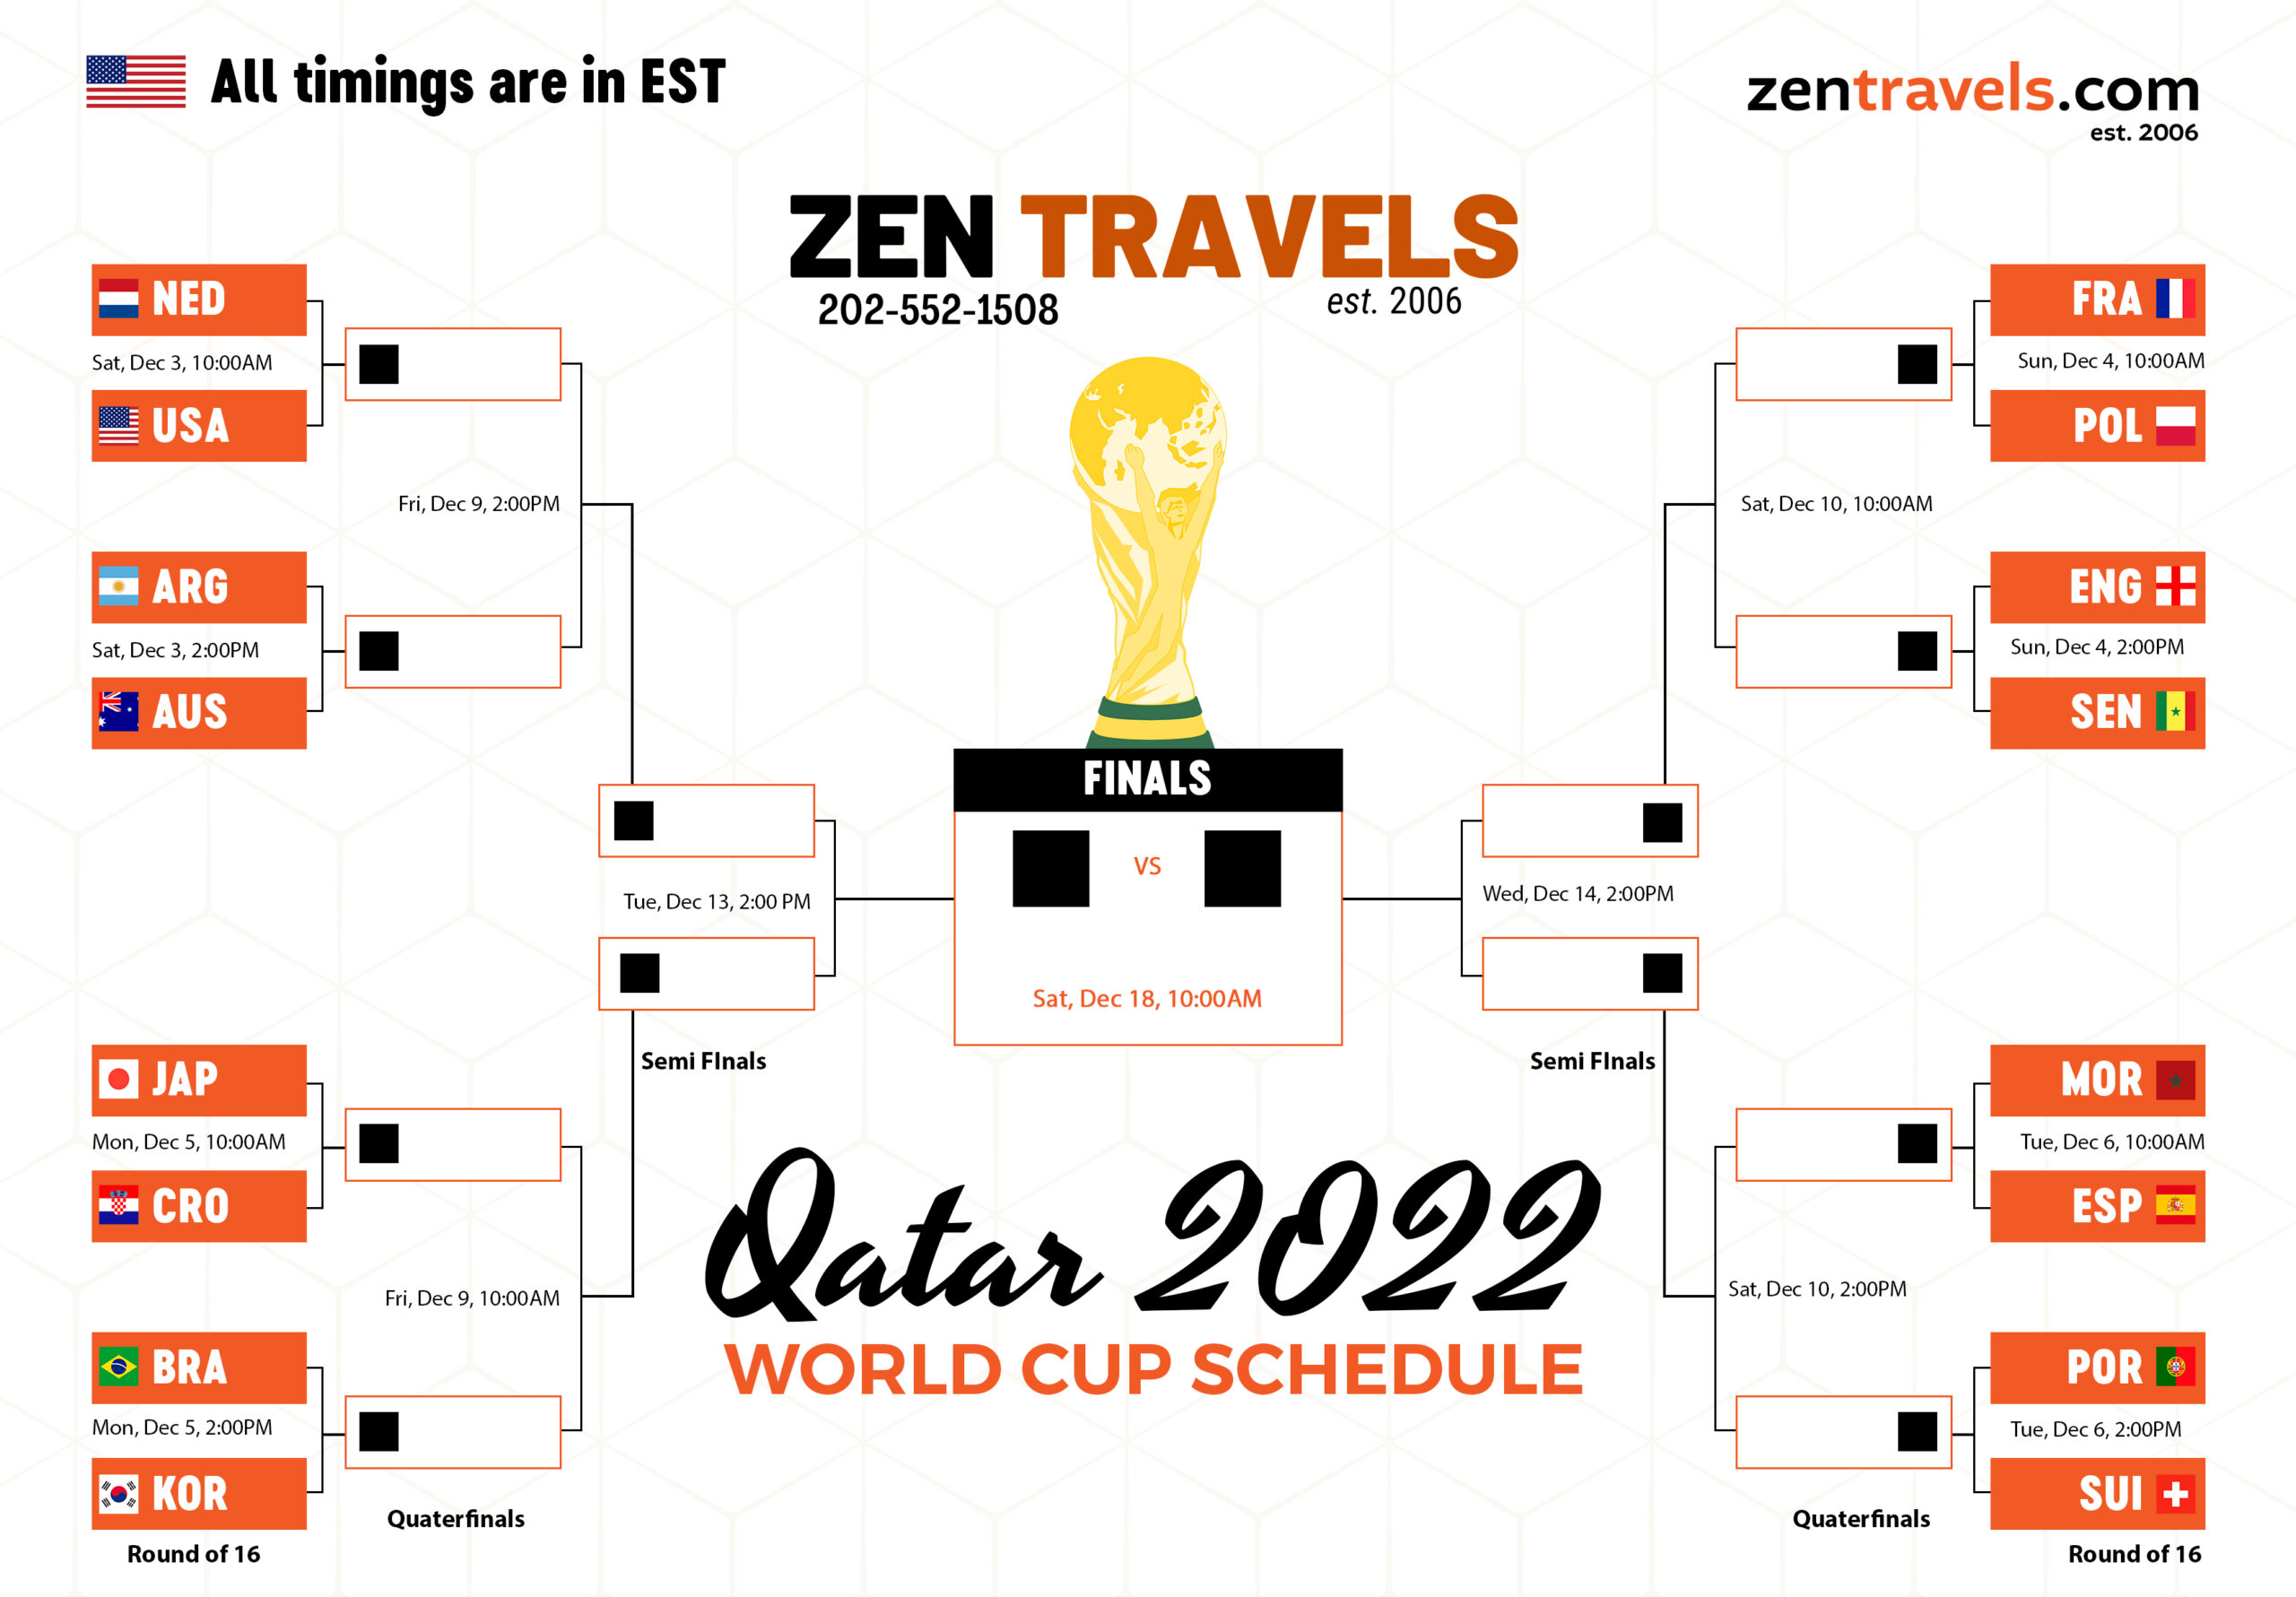 World Cup Schedule (US / EST Time format) (click to view image in a new tab)